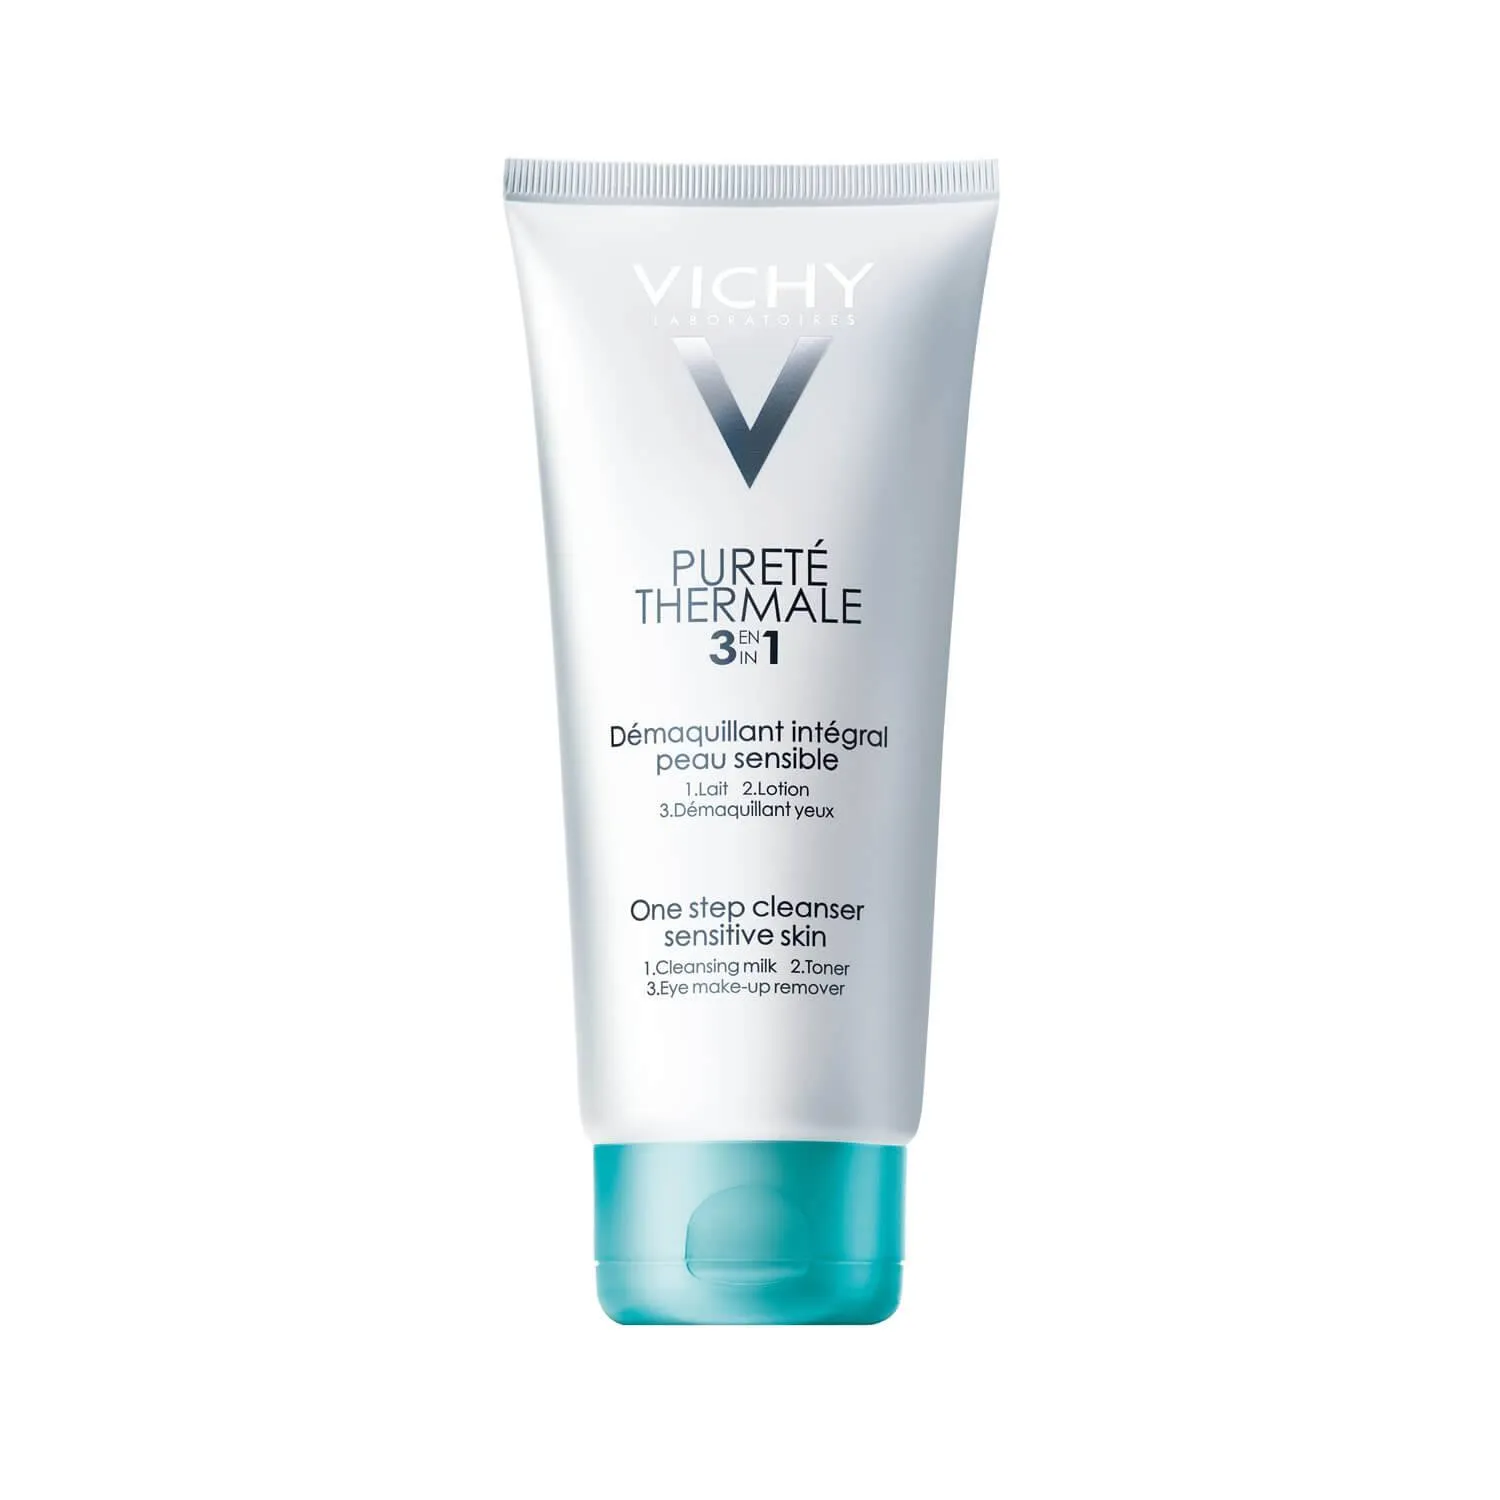 Purete Thermale One-Step Facial Cleanser by Vichy, the best French face wash for combination skin.